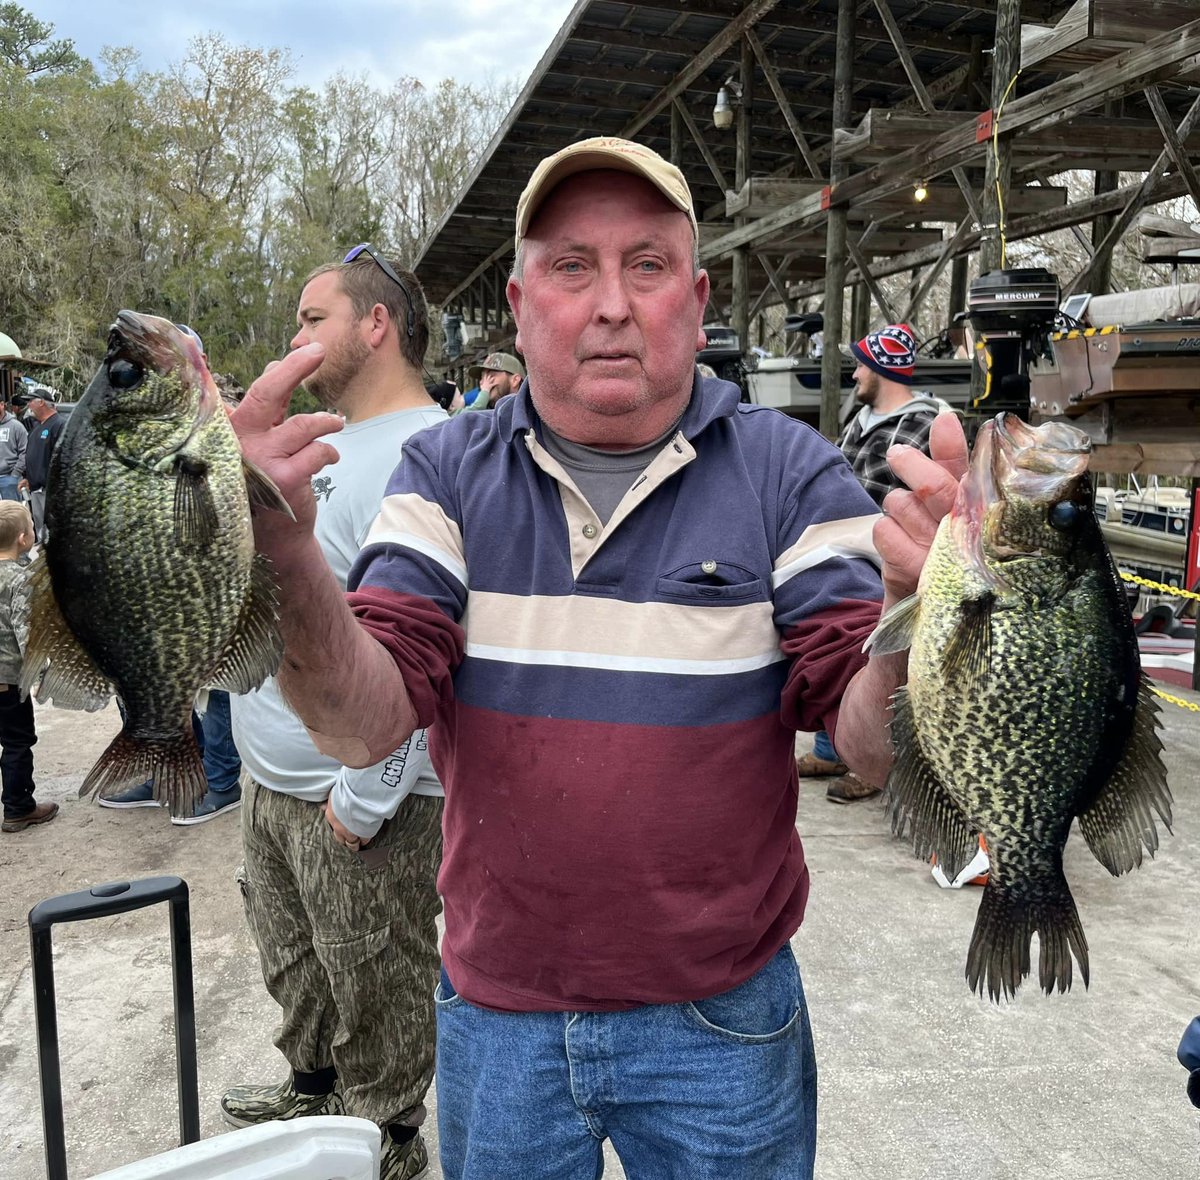 It was a great weekend for fishing on the St. Johns River in West Volusia! 🎣
Congratulations to Terry Barker who won the Berkeley LaBaw Memorial Speck Tournament with 28 pounds of crappie in two days!

#crappie #visitwestvolusia